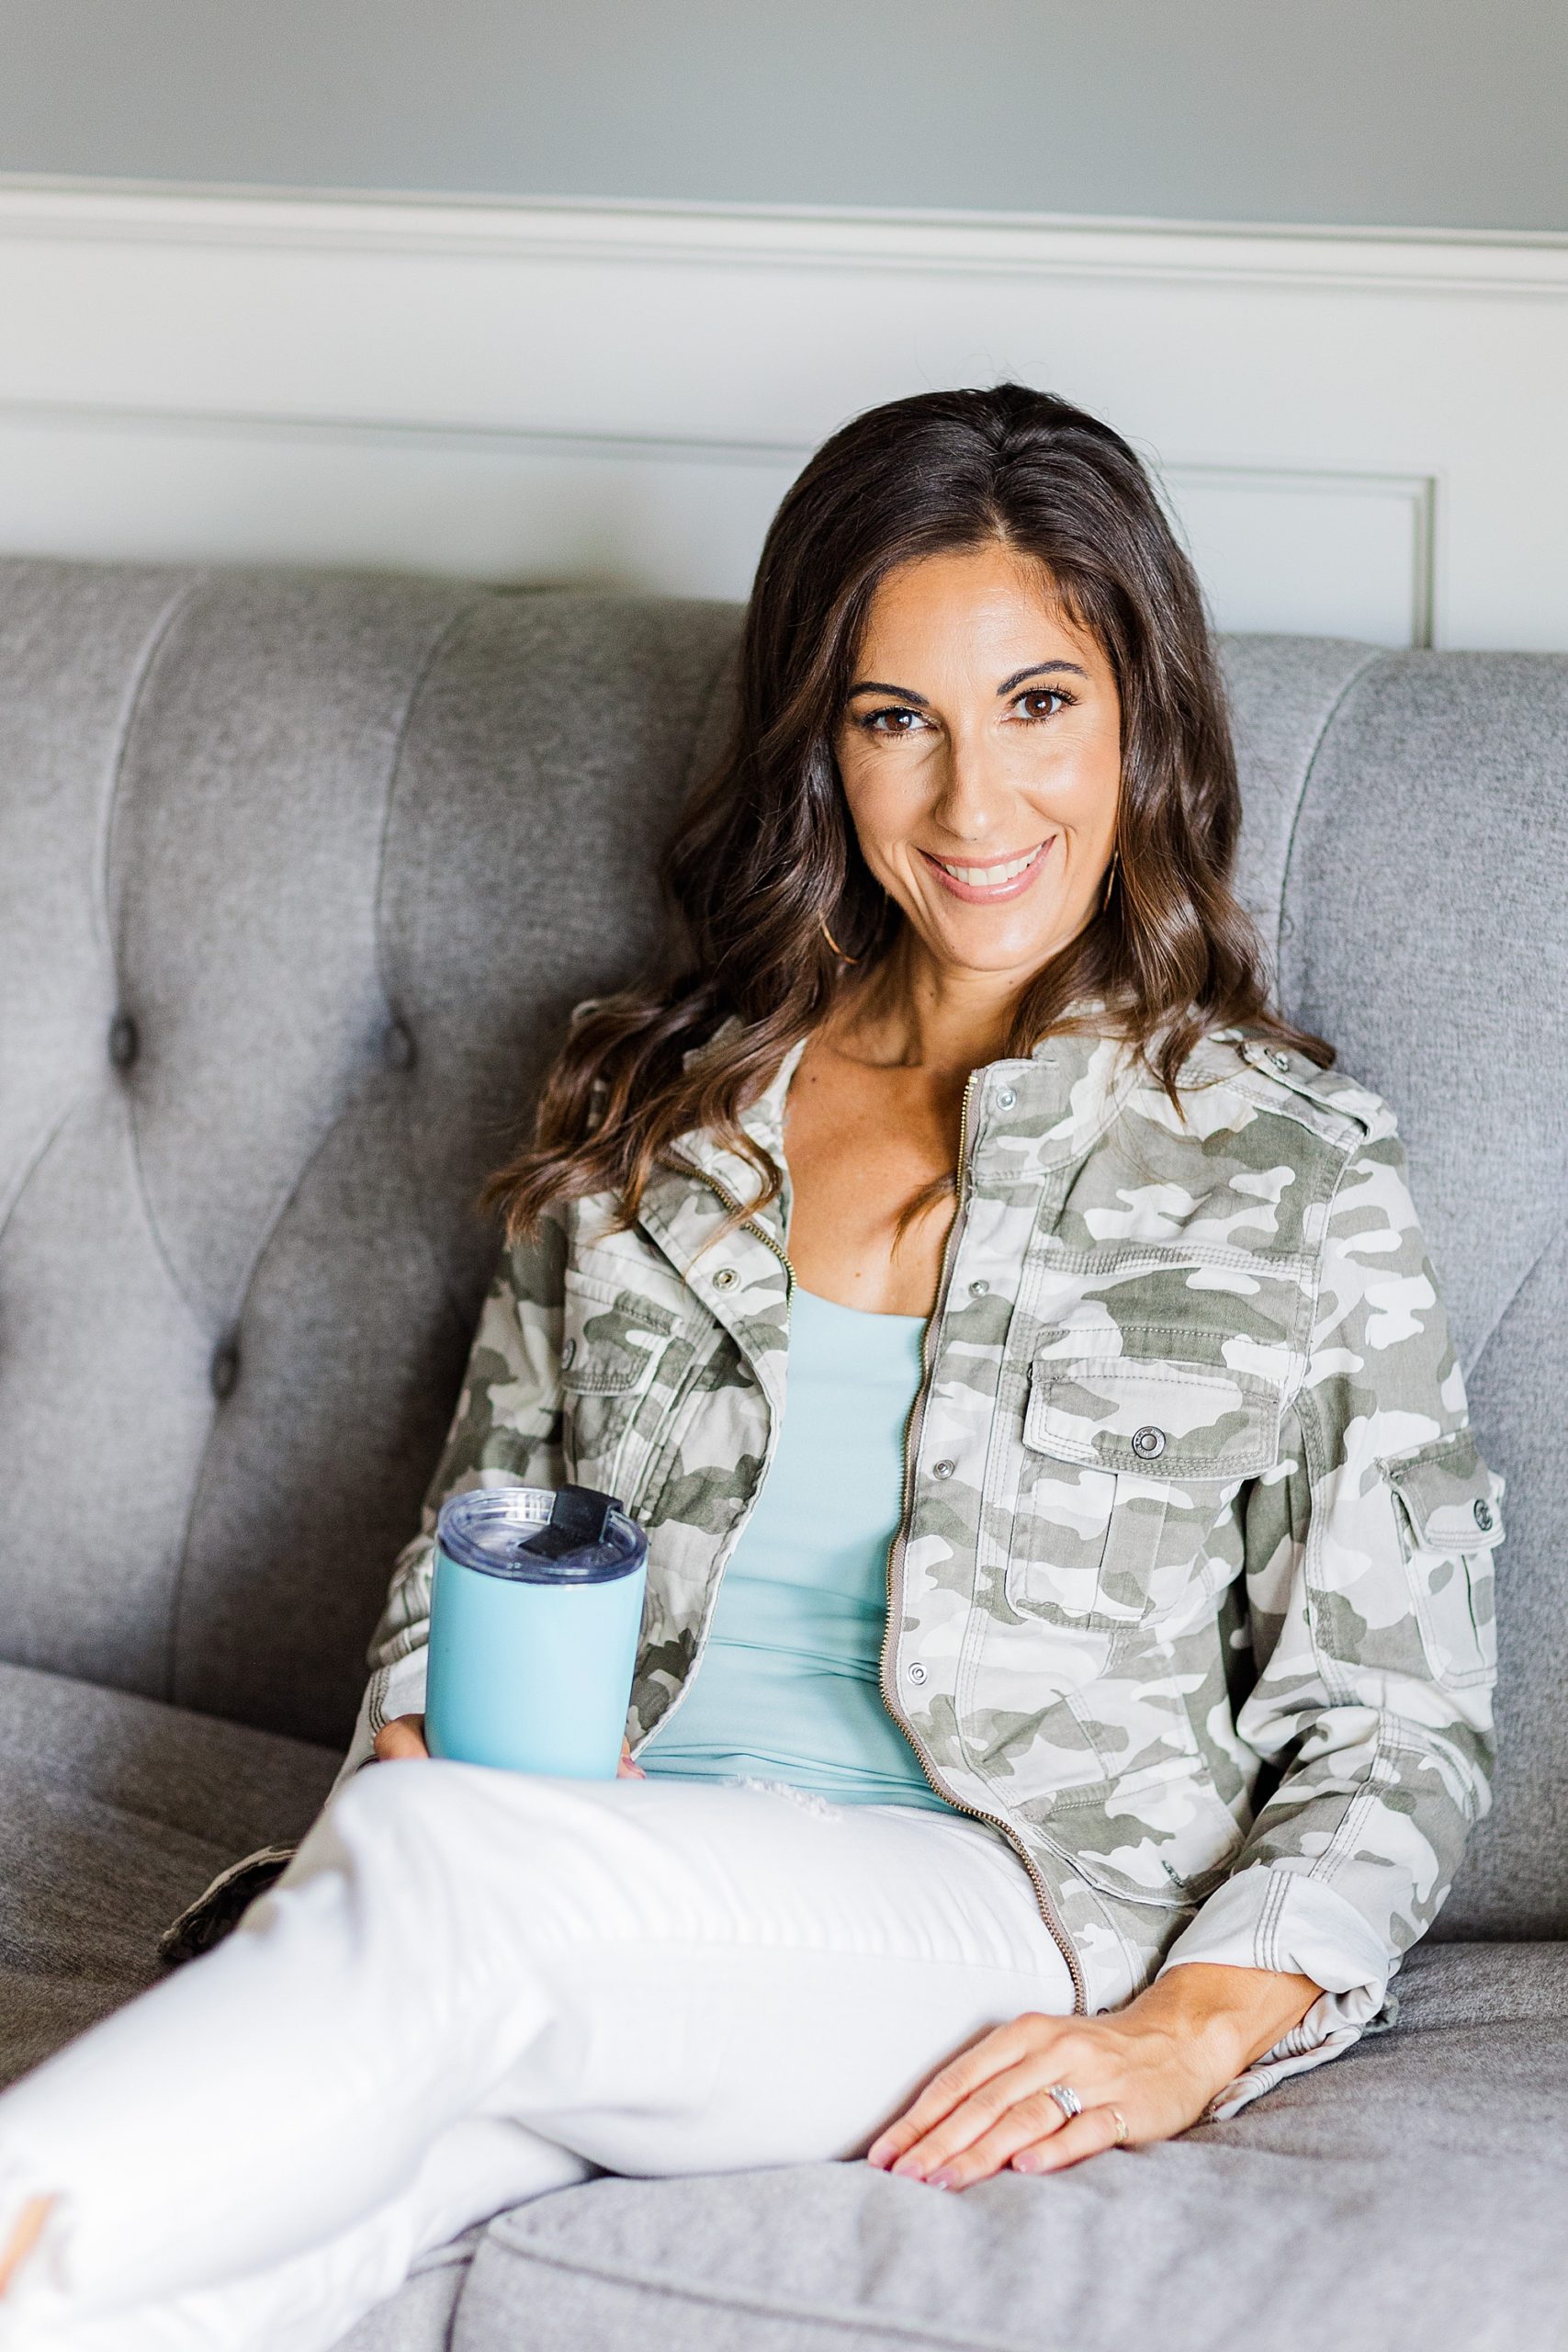 woman in army jacket sits on couch holding blue cup during Franklin branding photos